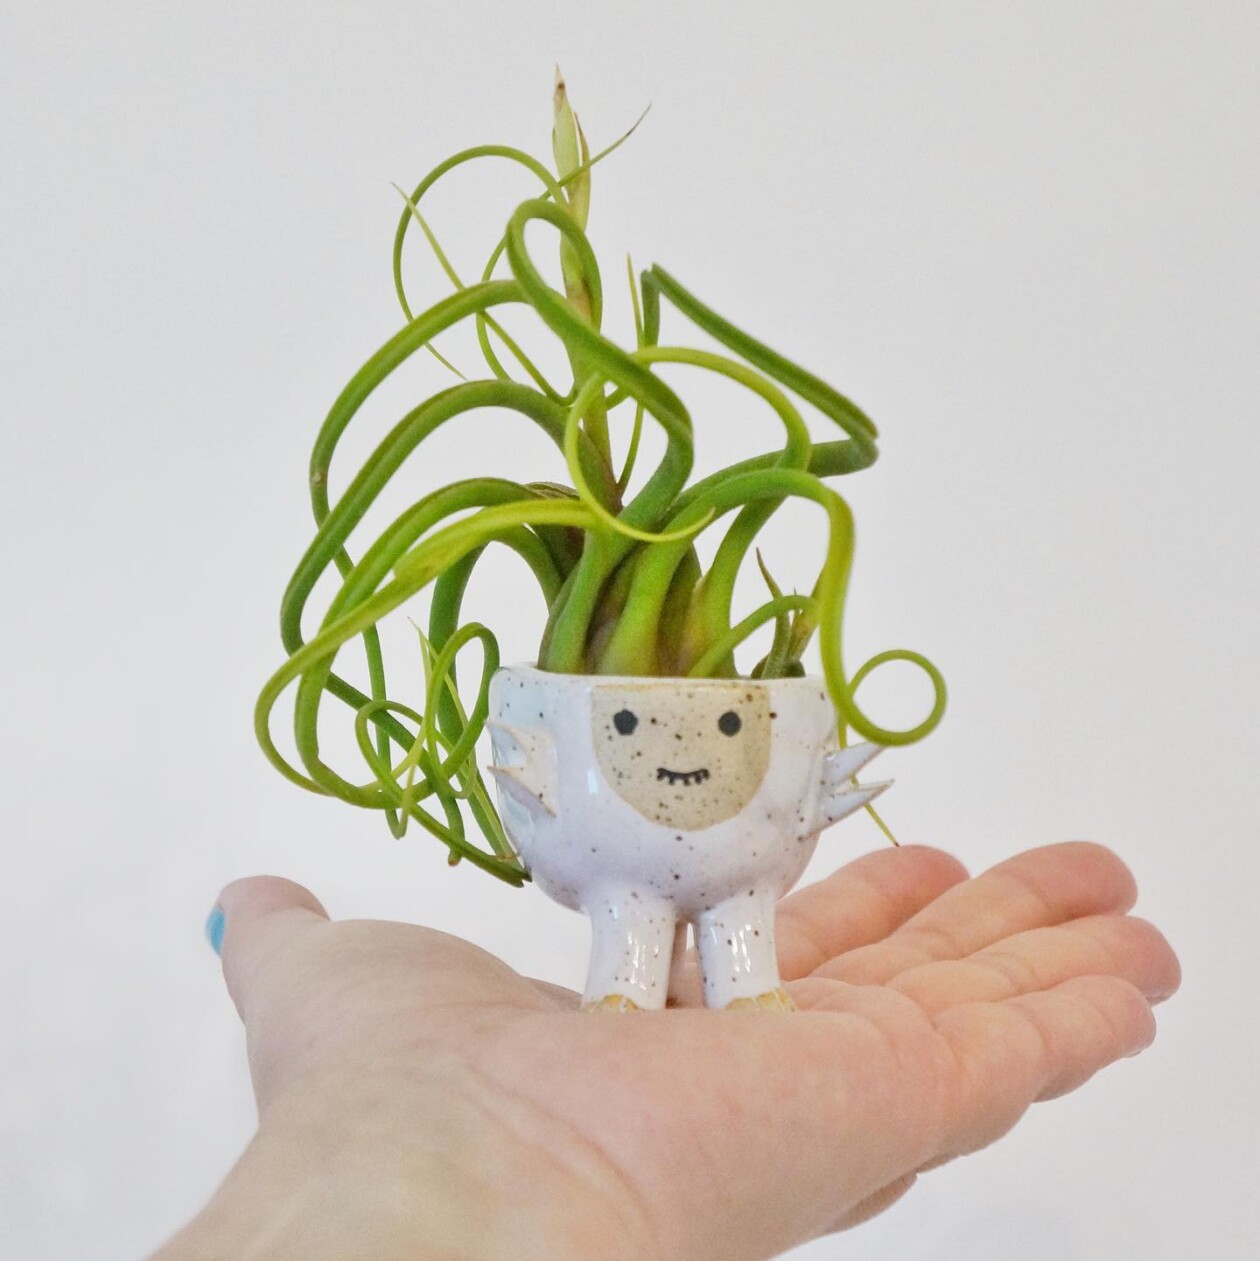 Amusing And Adorable Anthropomorphic Planters By Abby Ozaltug (7)